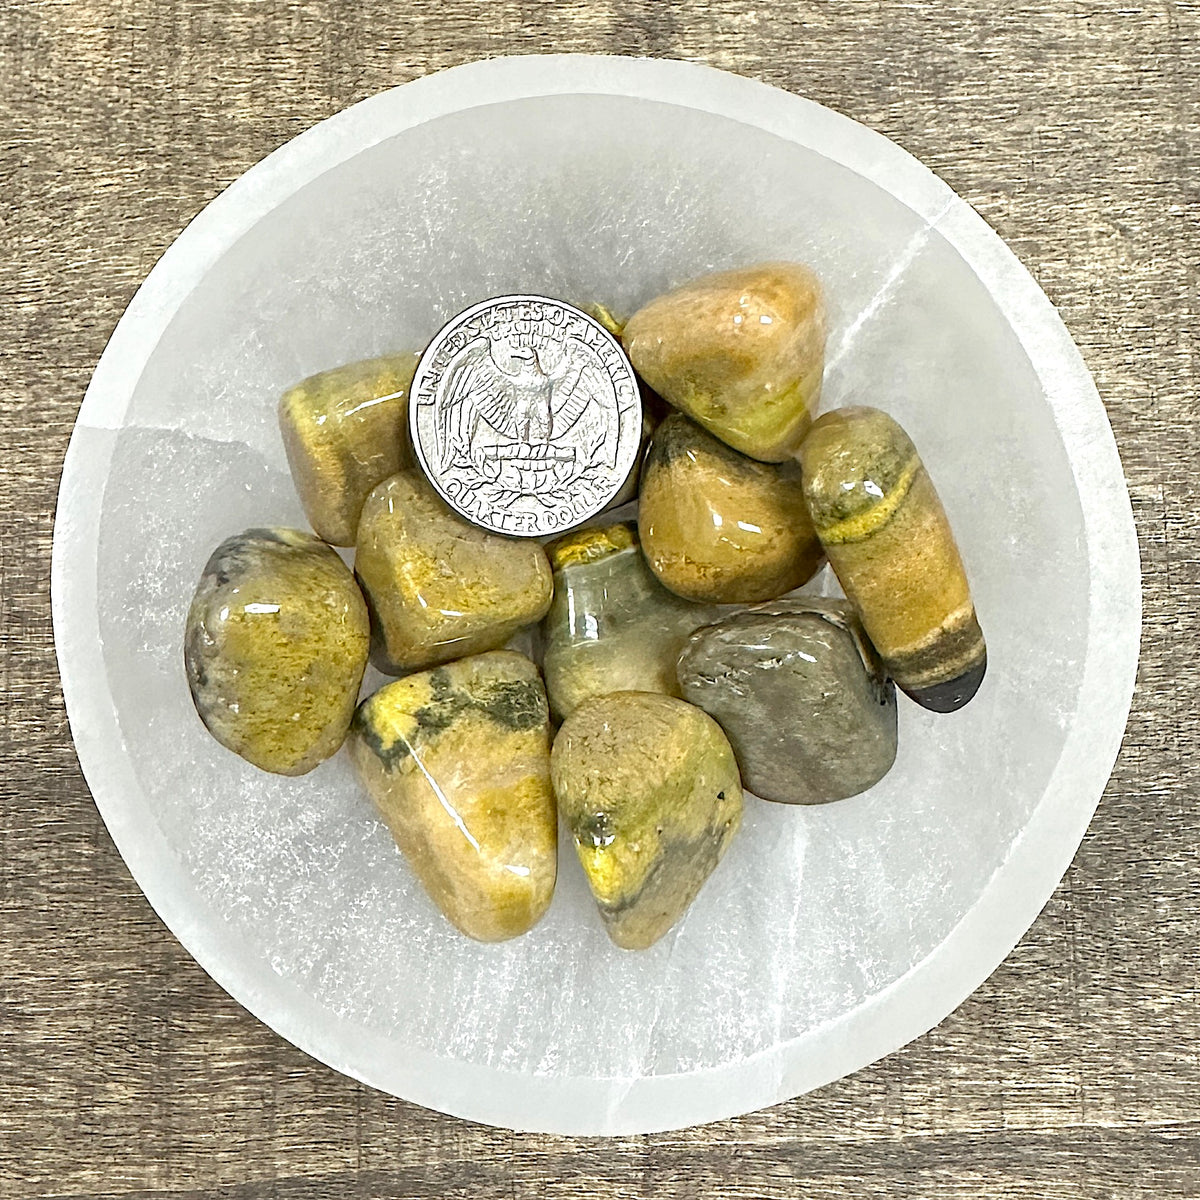 Comparison shot of a US quarter coin and various bumblebee jasper tumbled stones in a bowl